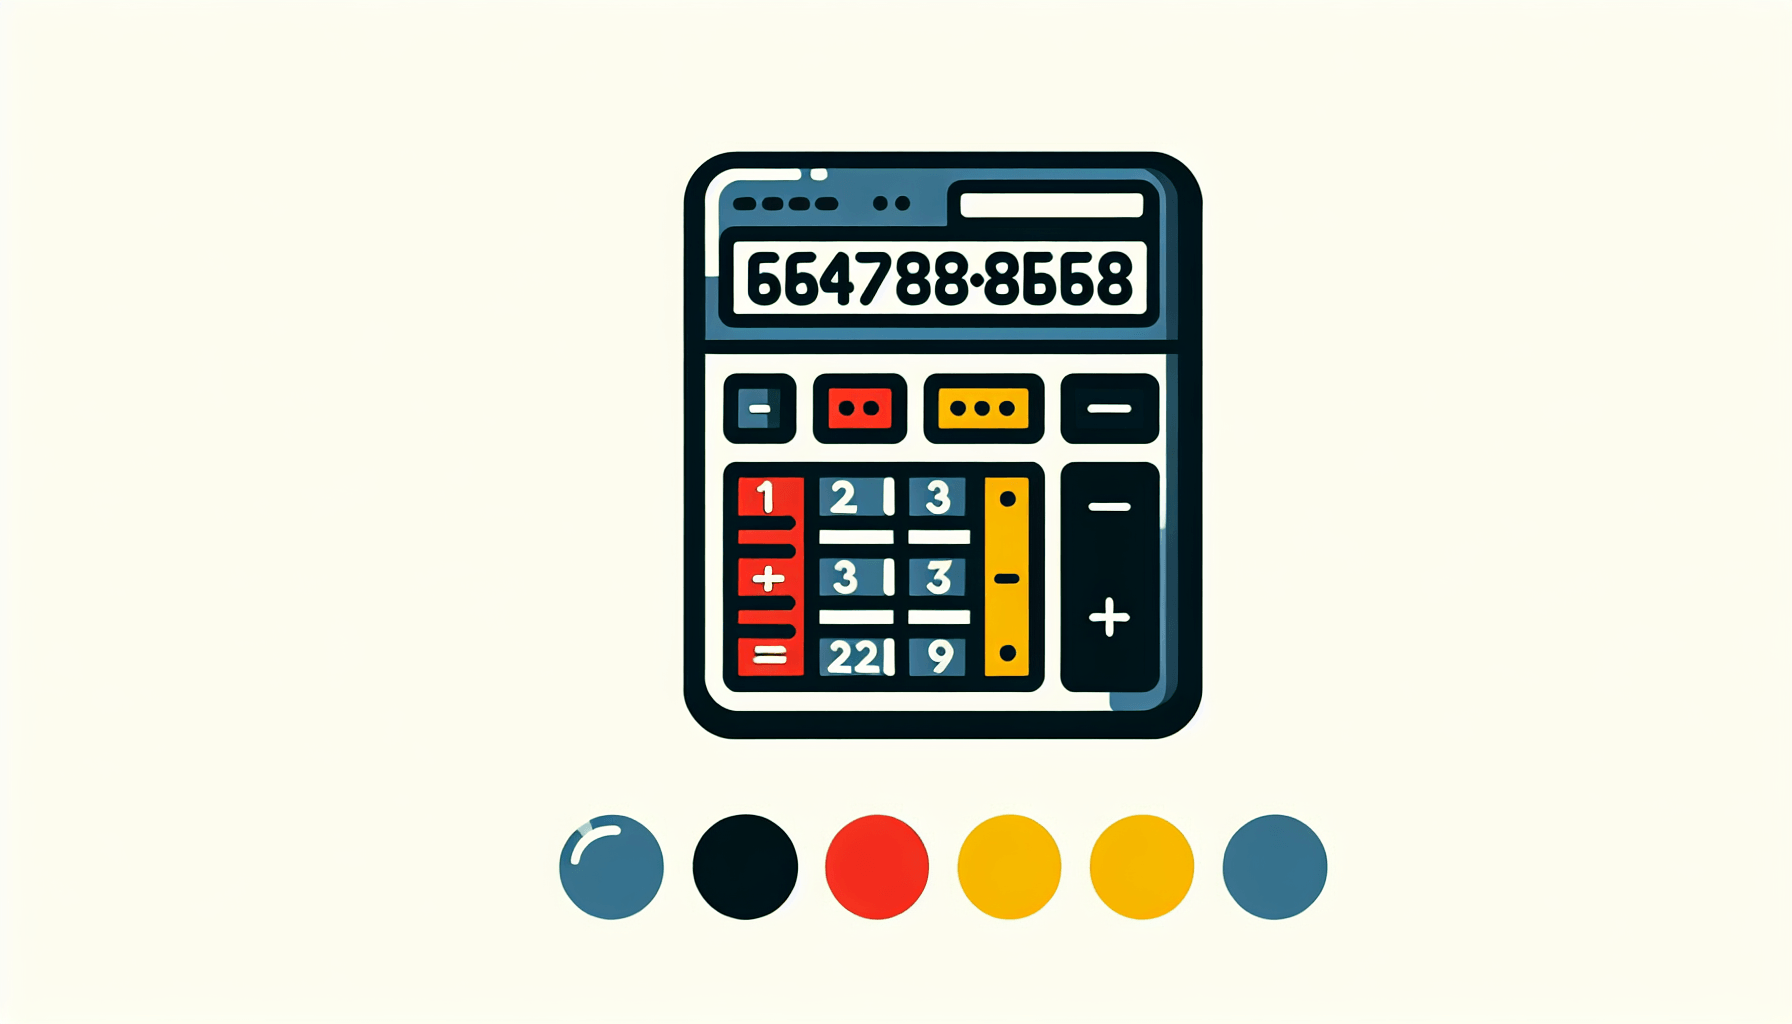 Calculator in flat illustration style and white background, red #f47574, green #88c7a8, yellow #fcc44b, and blue #645bc8 colors.